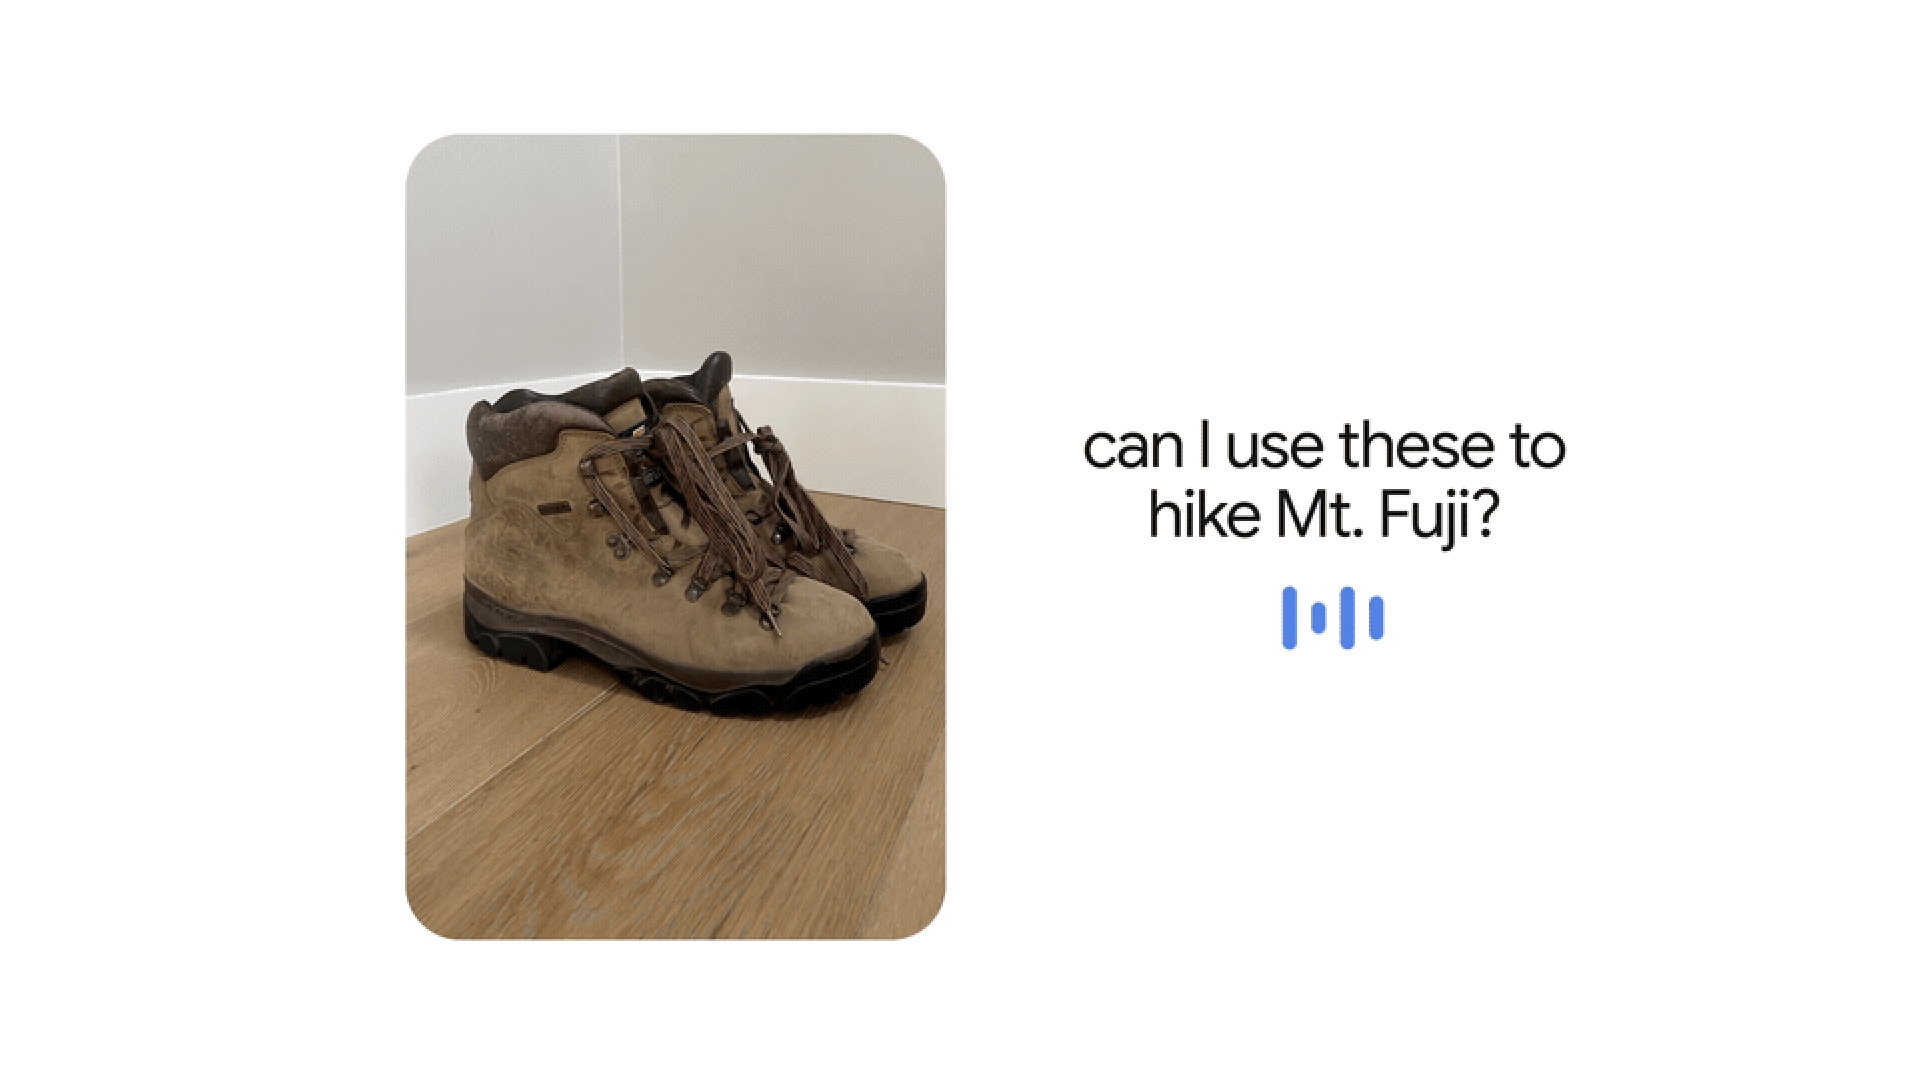 can I use these to hike Mt. Fuji?